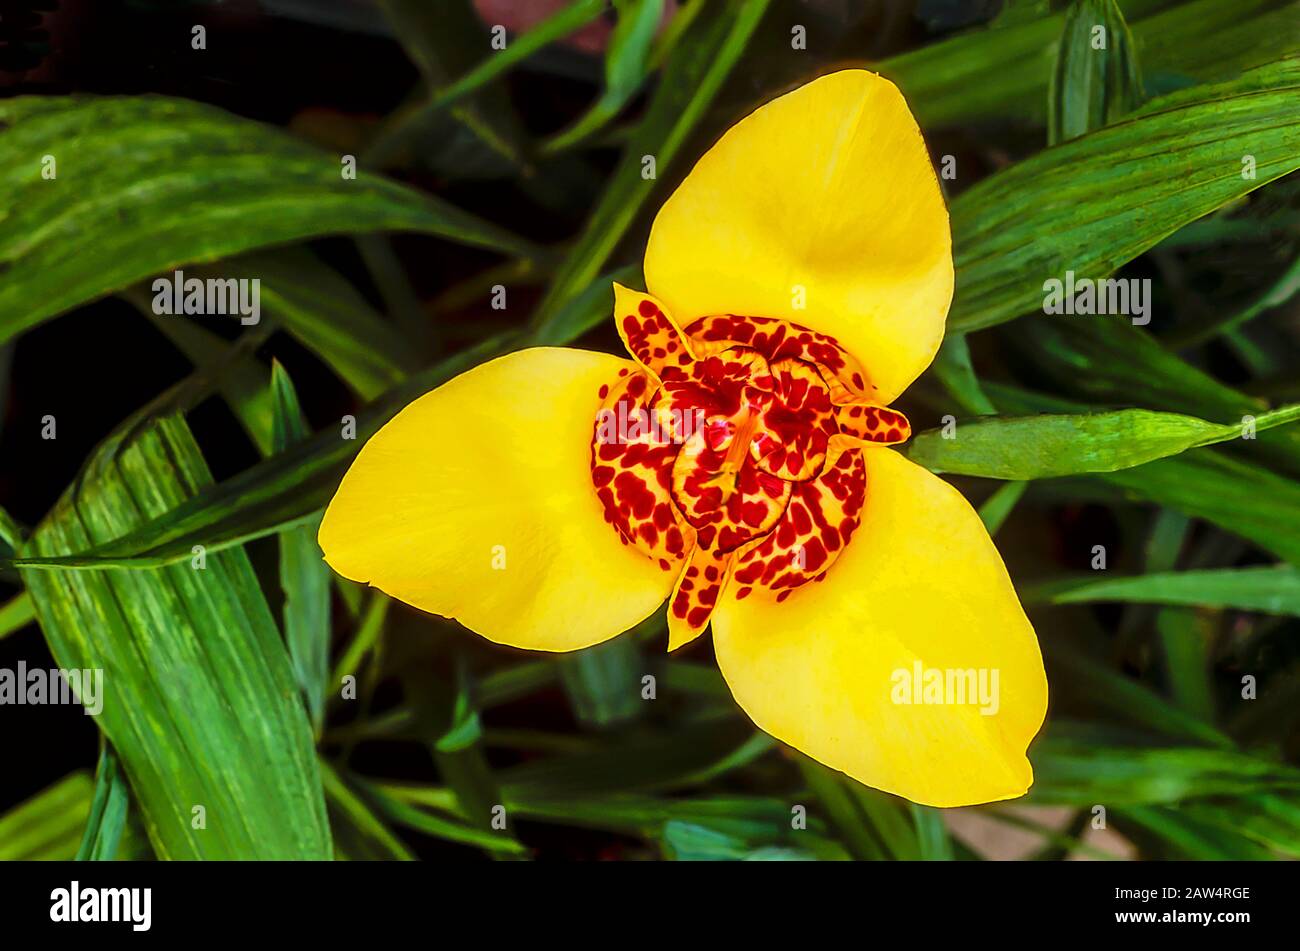 Close up of Tigridia pavonia flower against background of leaves. Other names are Peacock flower and Tiger flower. A perennial summer flowering plant. Stock Photo